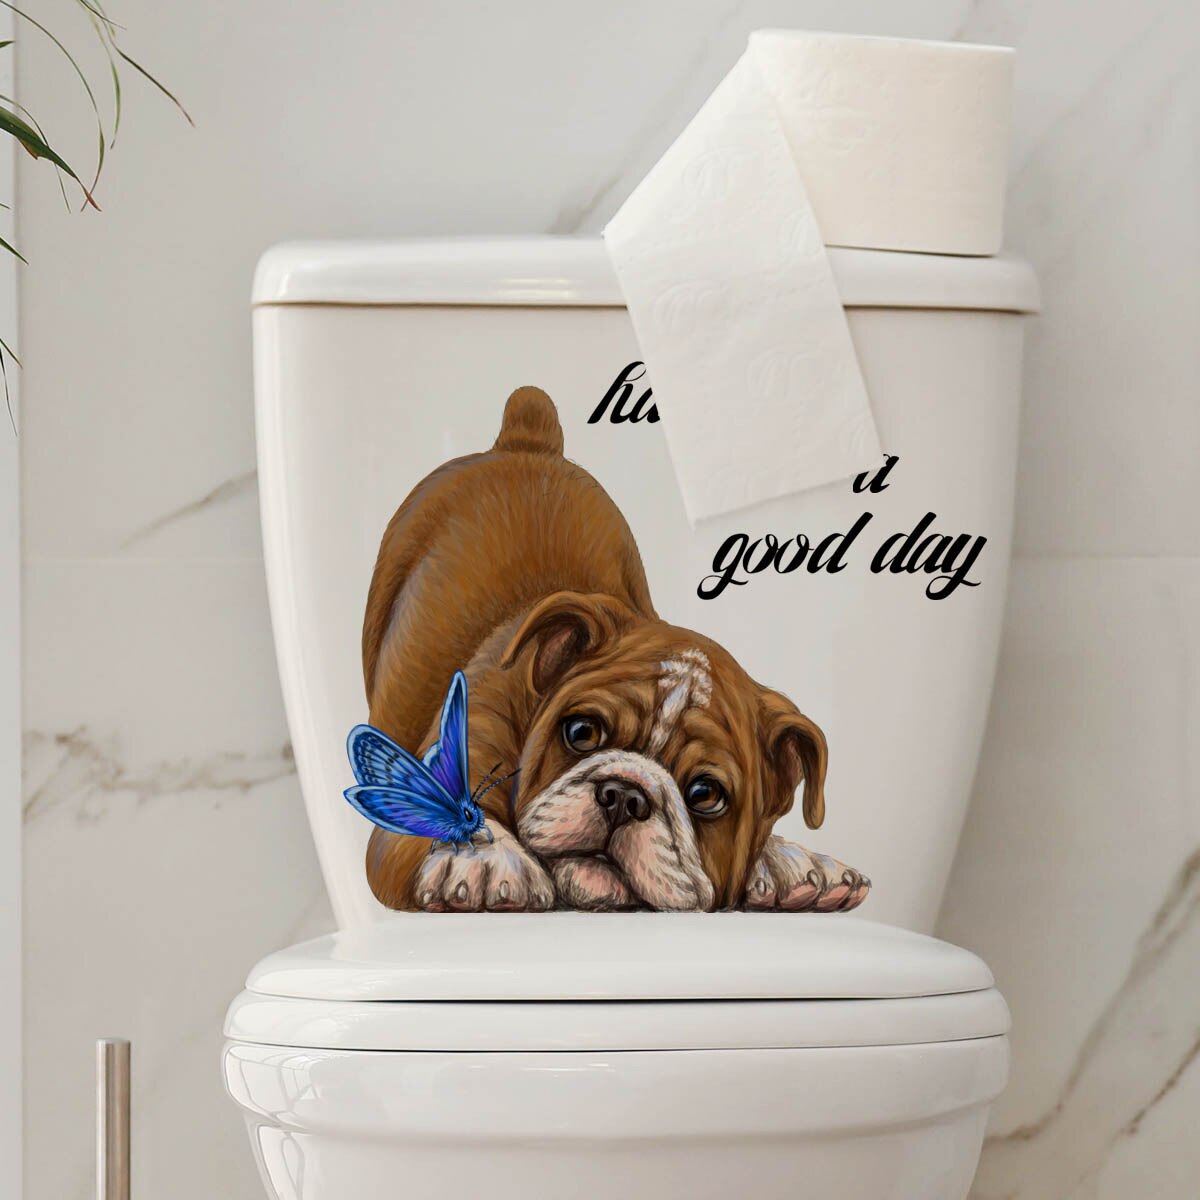 Toilet Stickers Dog Vivid Wall Sticker Lovely Animal Pvc Waterproof Decal For Bathroom Toilet Kicthen Decorative